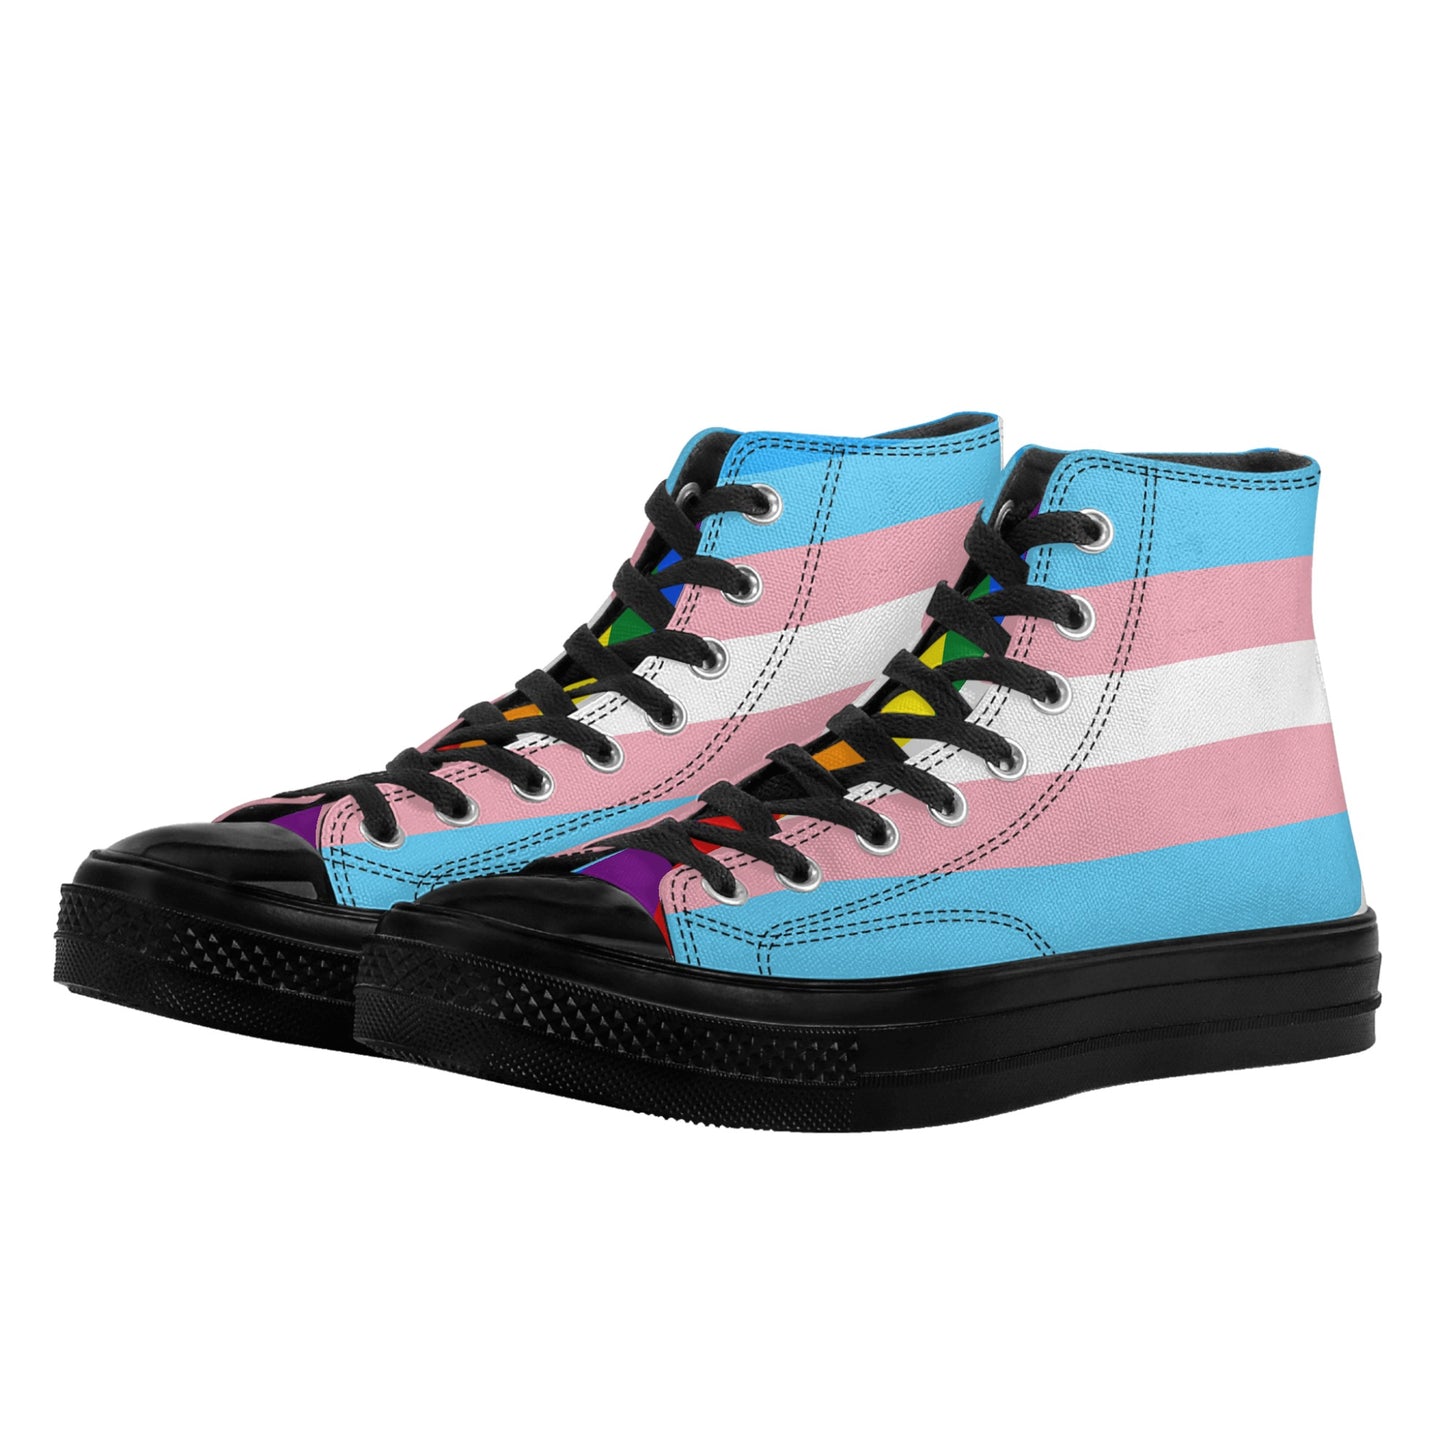 Transgender Pride Collection - Mens Classic Black High Top Canvas Shoes for the LGBTQIA+ community